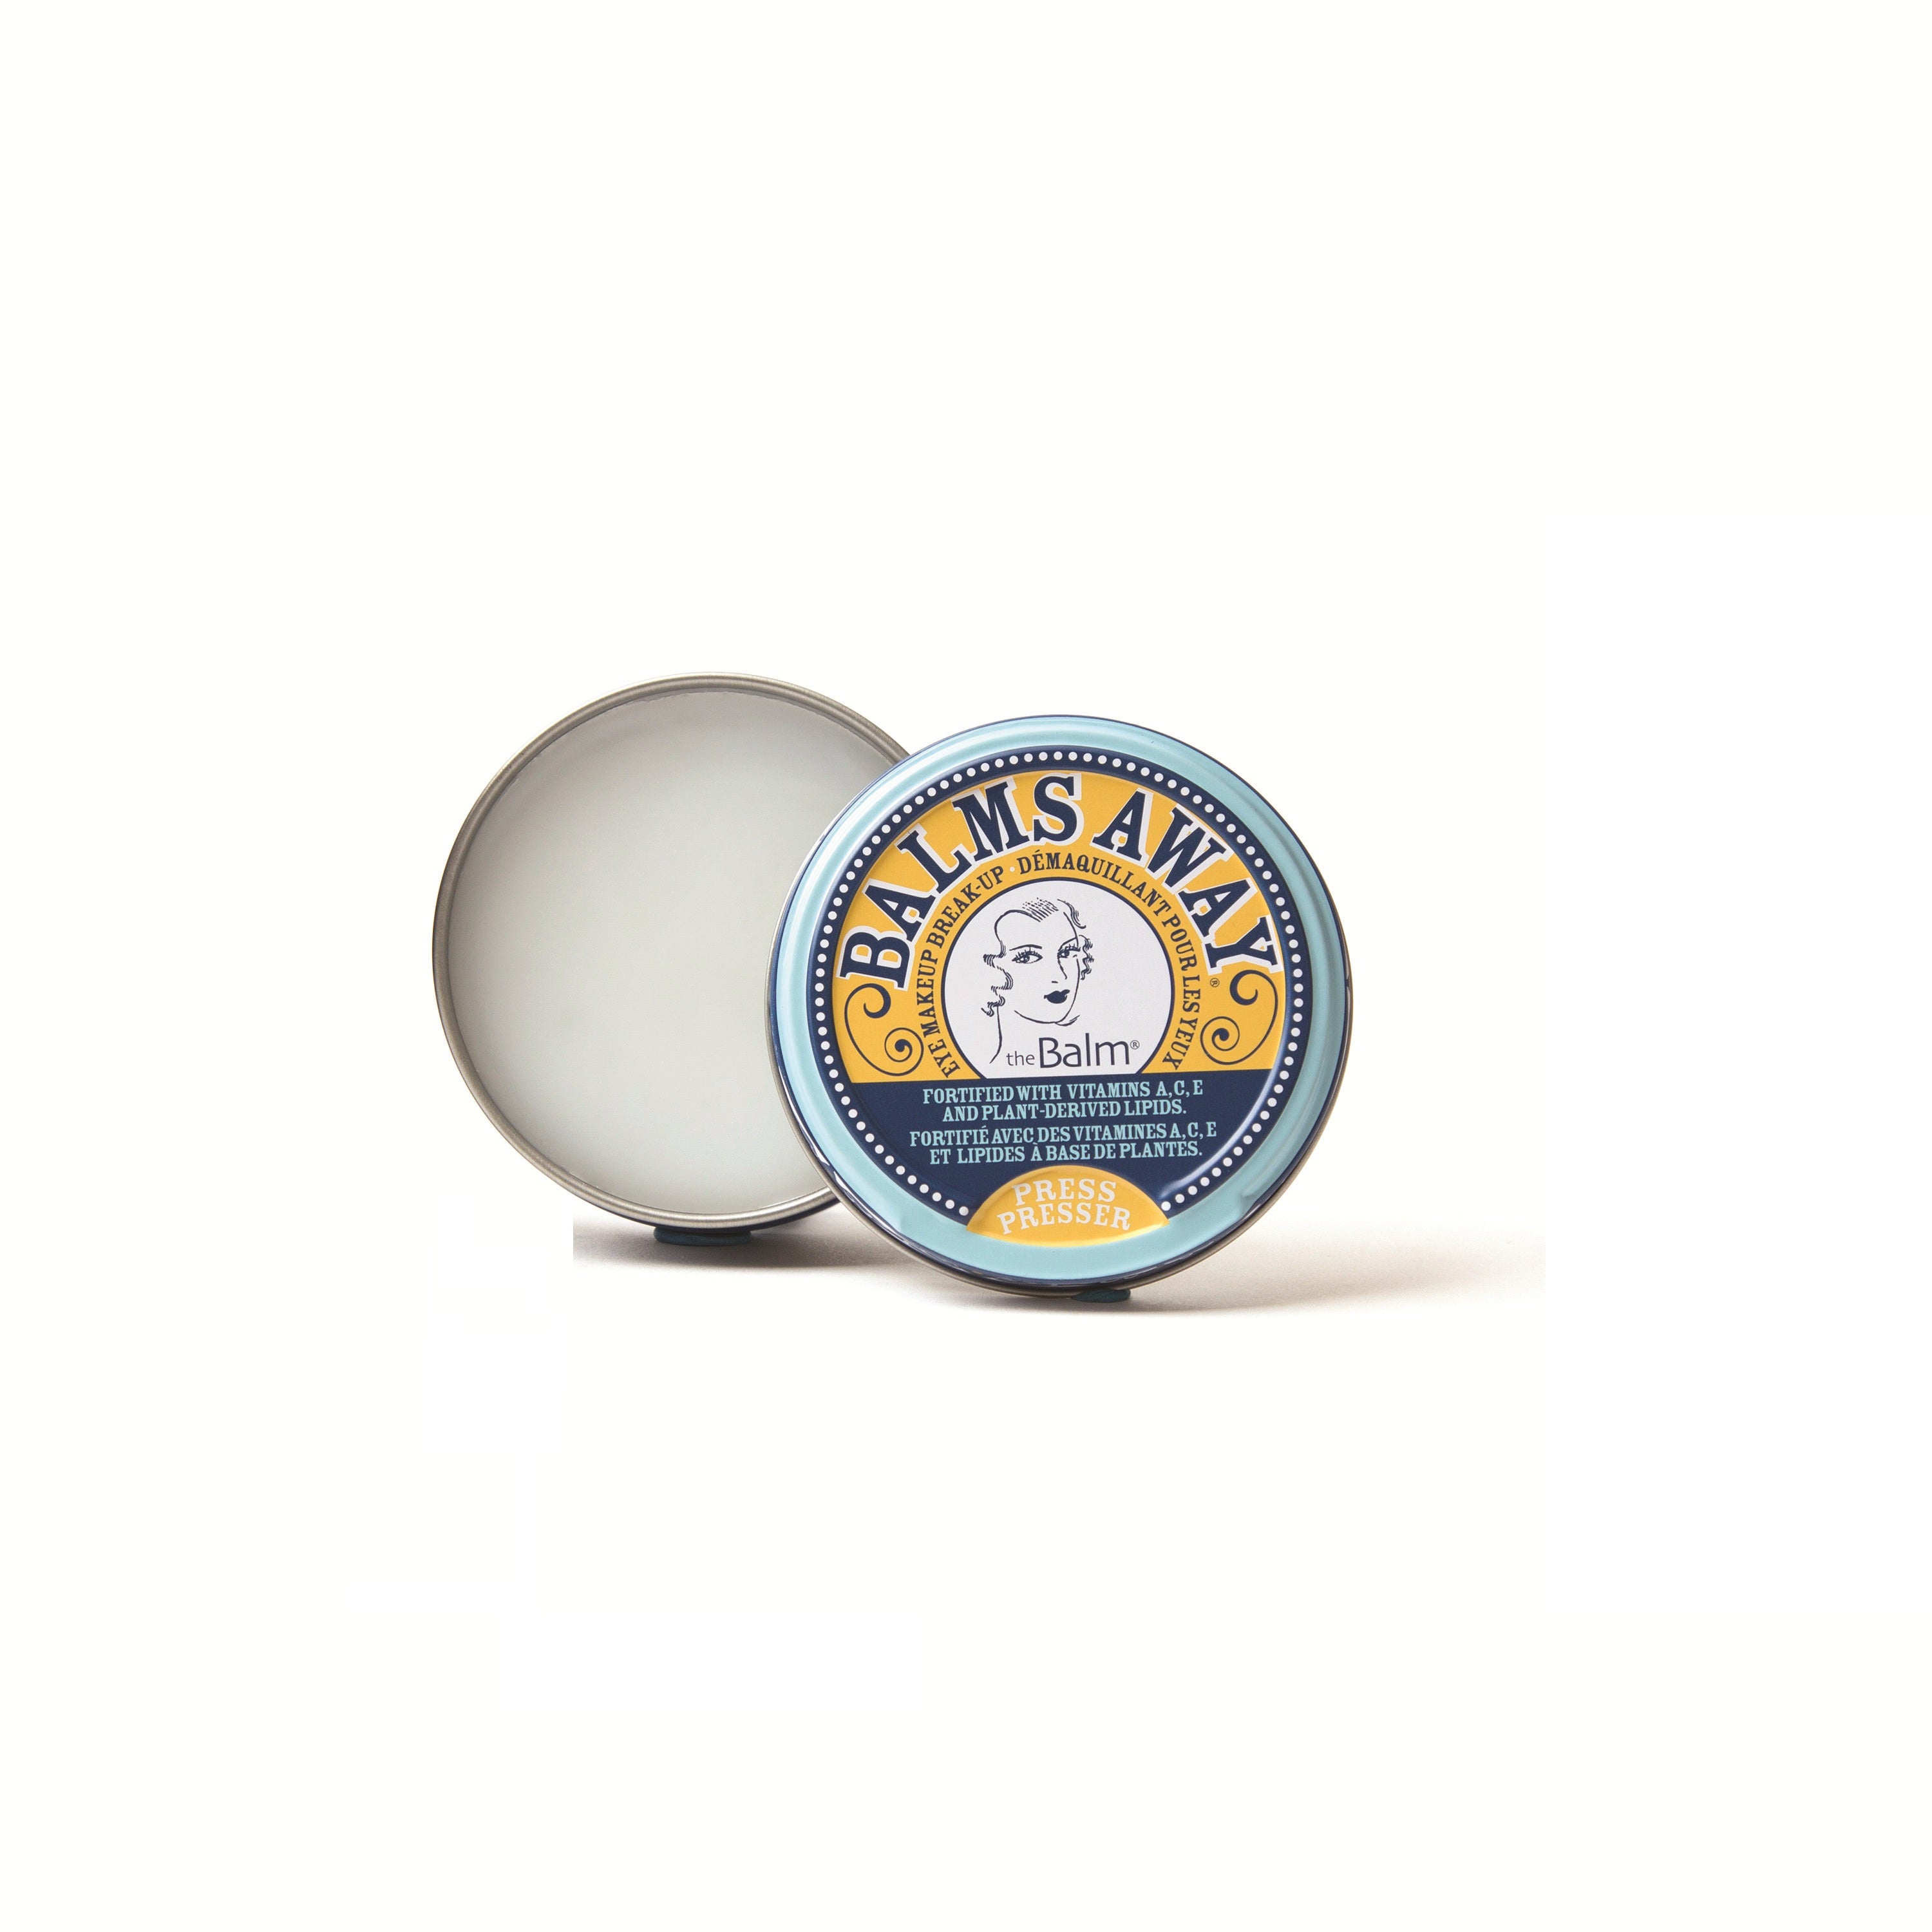 The Balm Limited Edition